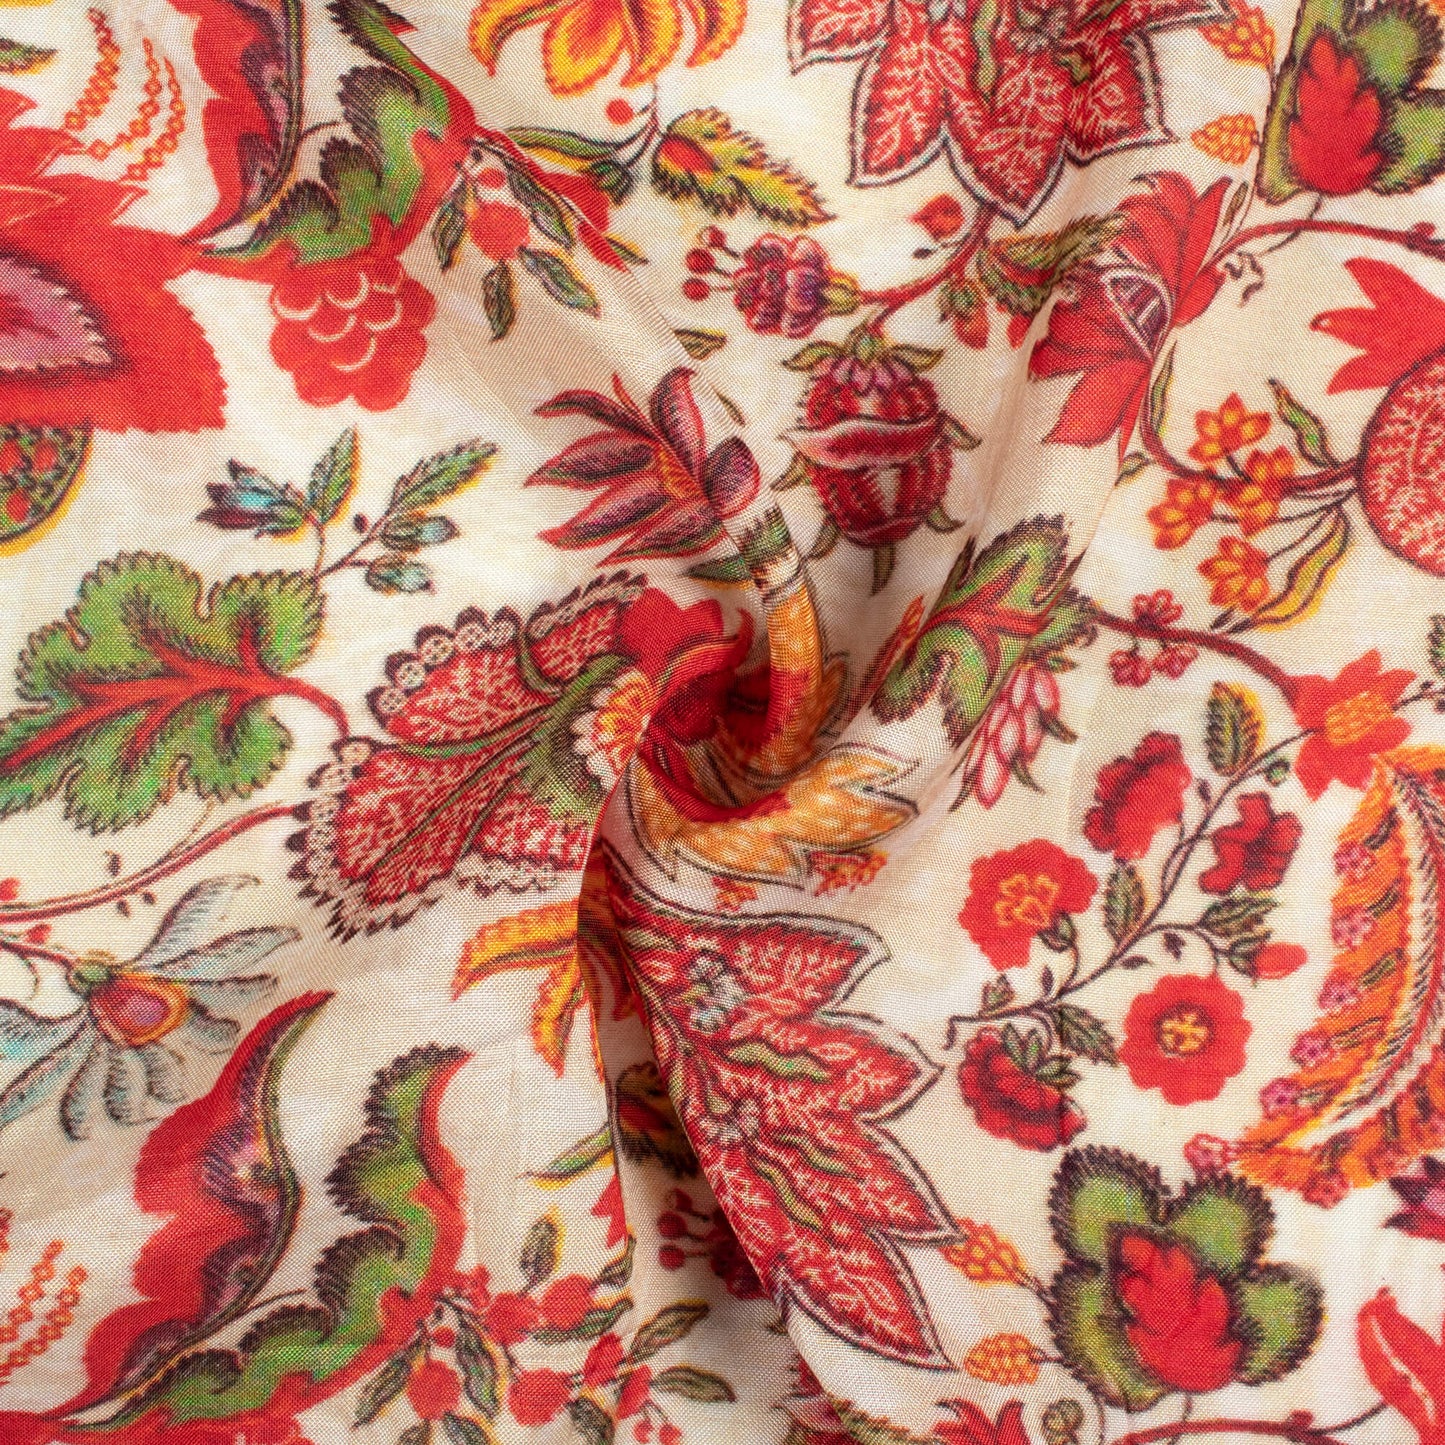 Off White And Blood Red Floral Pattern Digital Print Viscose Muslin Fabric